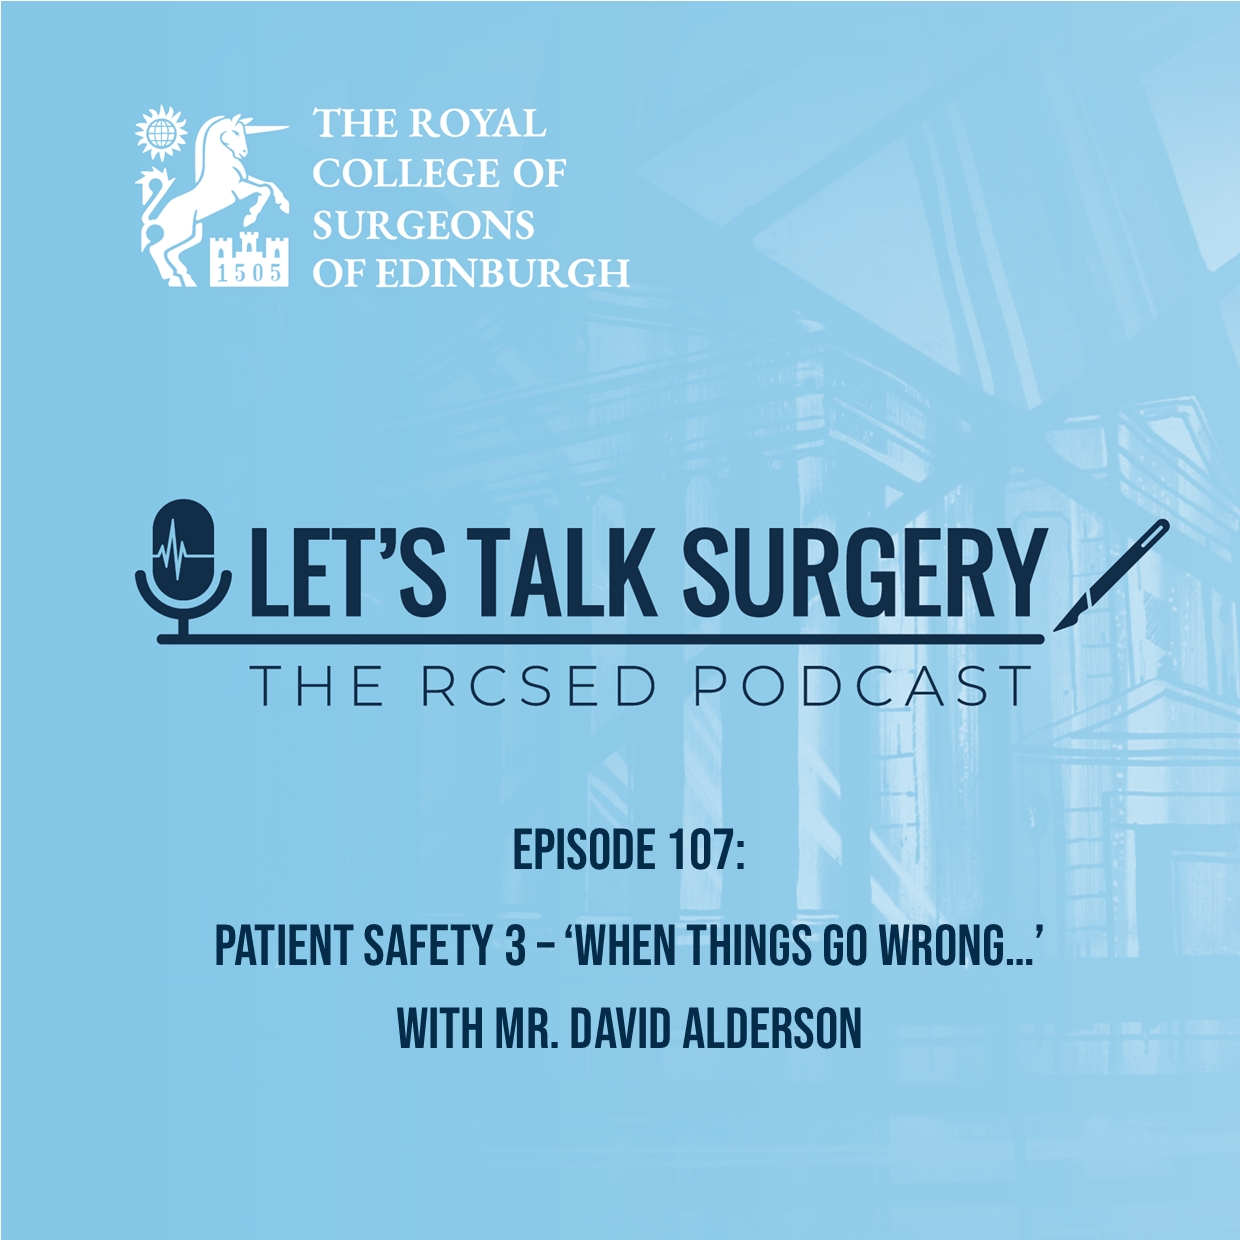 Patient Safety 3 – ‘When things go wrong…’ with Mr. David Alderson